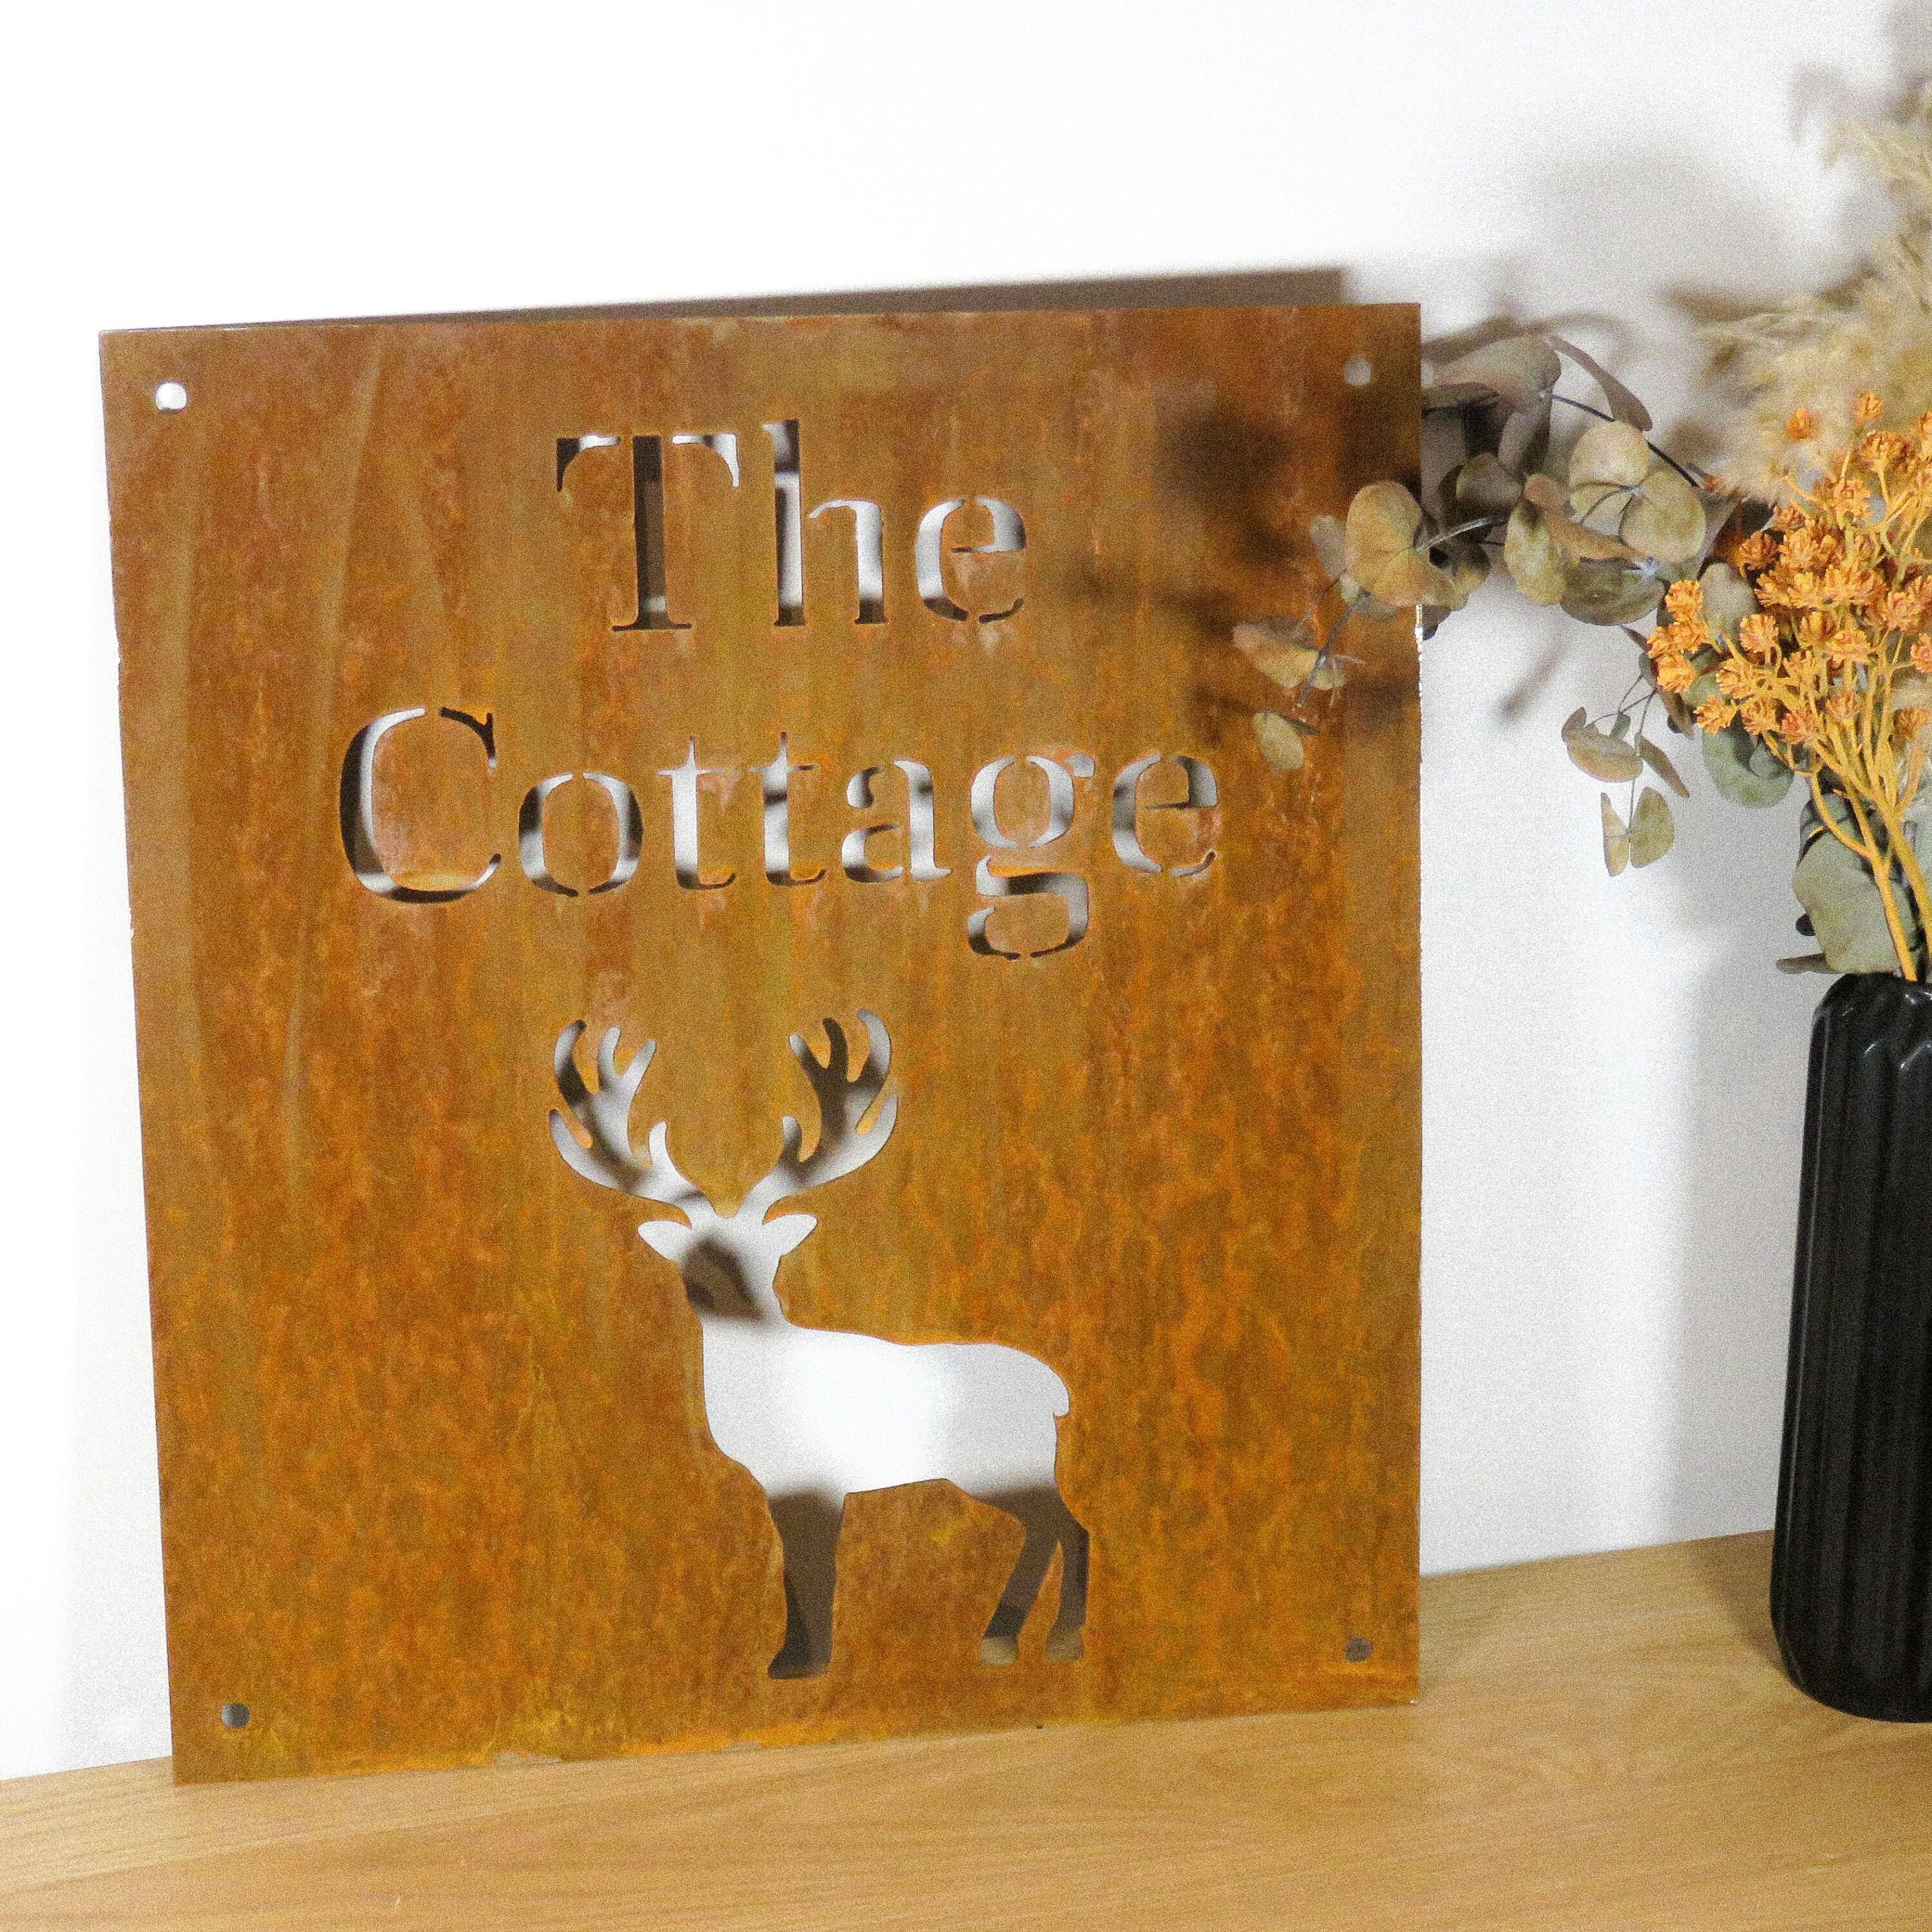 Corten steel house sign with stag image